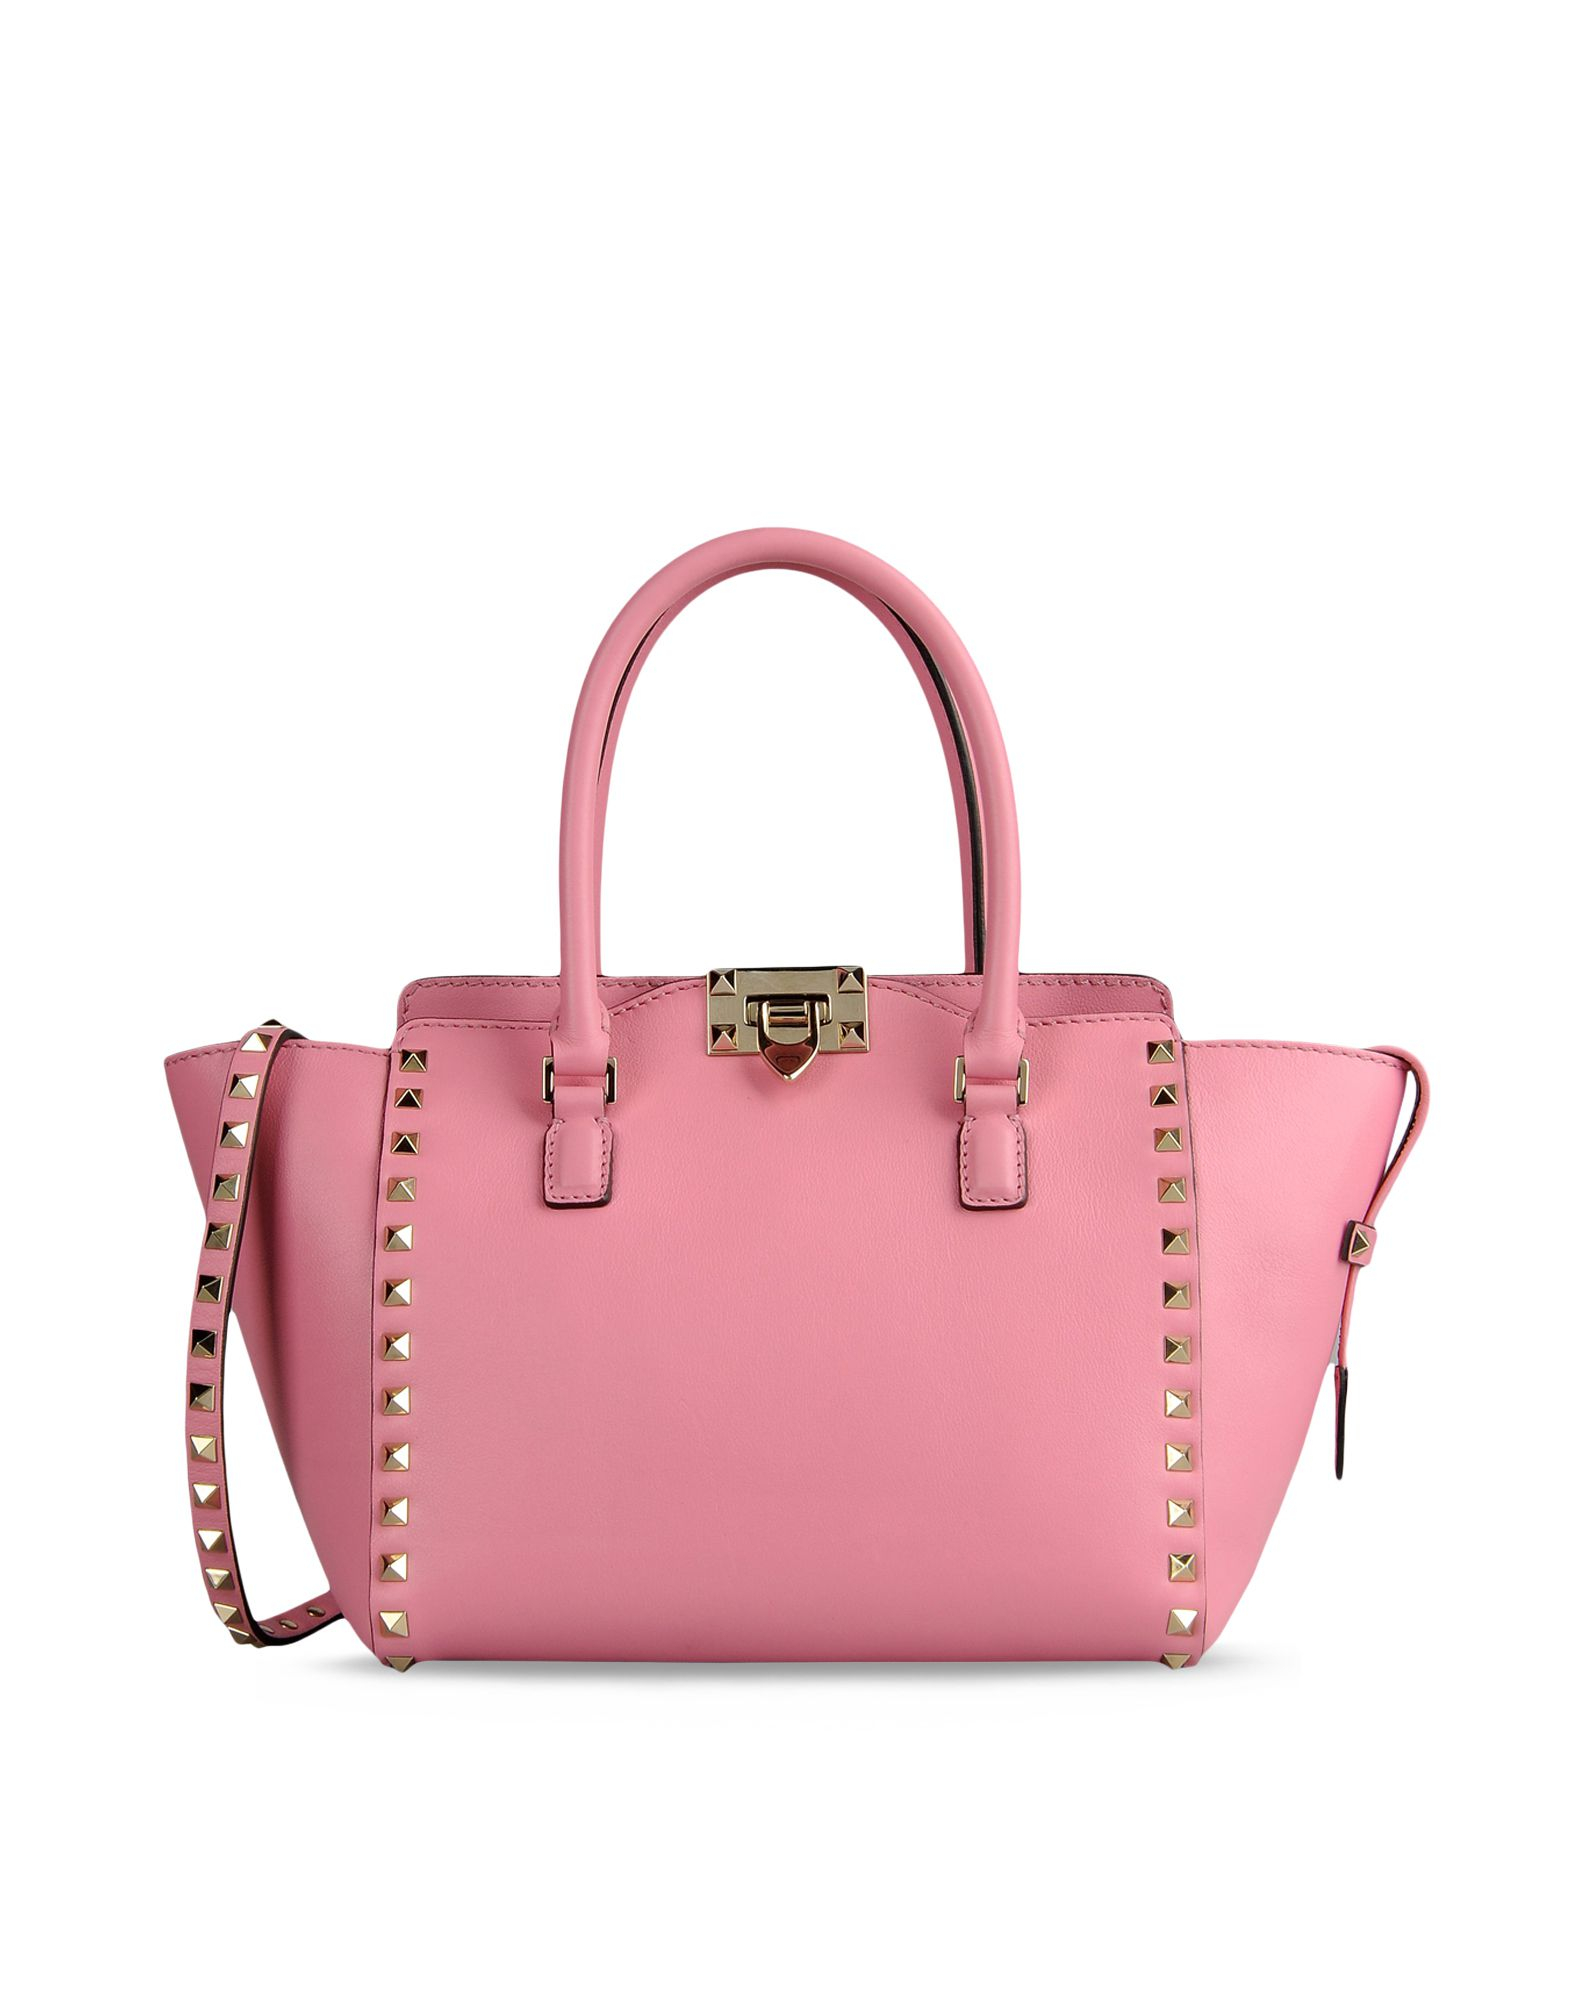 Valentino Rockstud Small Double Handle Bag in Pink | Lyst